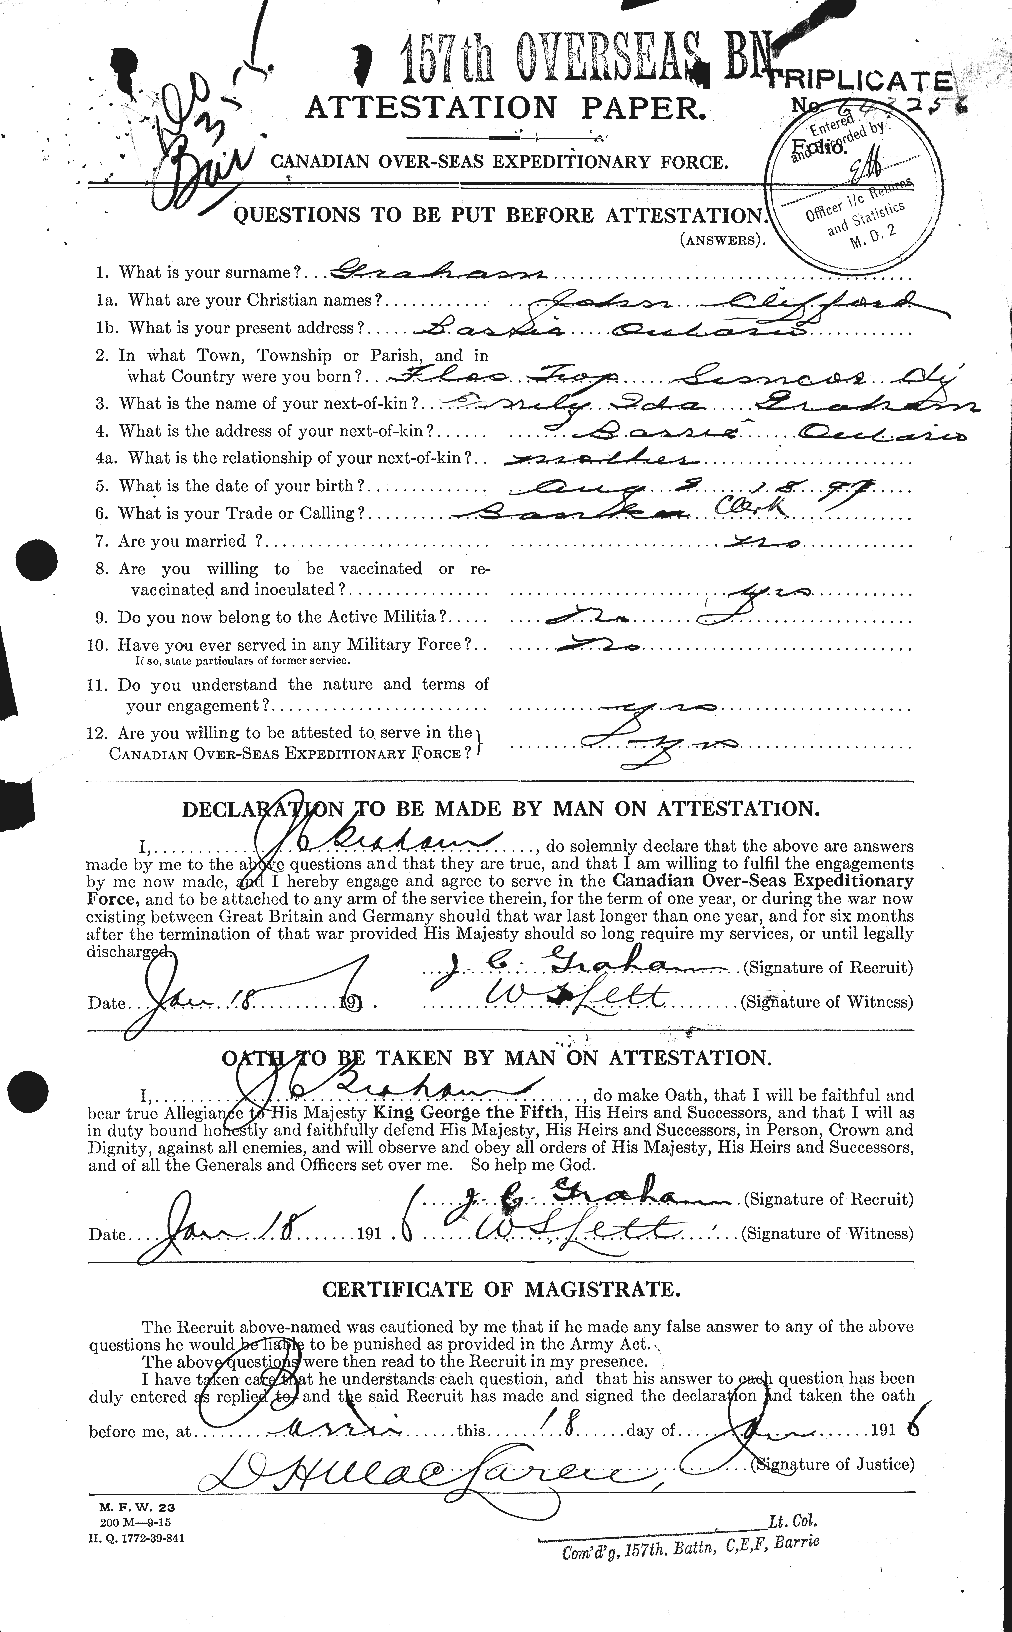 Personnel Records of the First World War - CEF 359164a